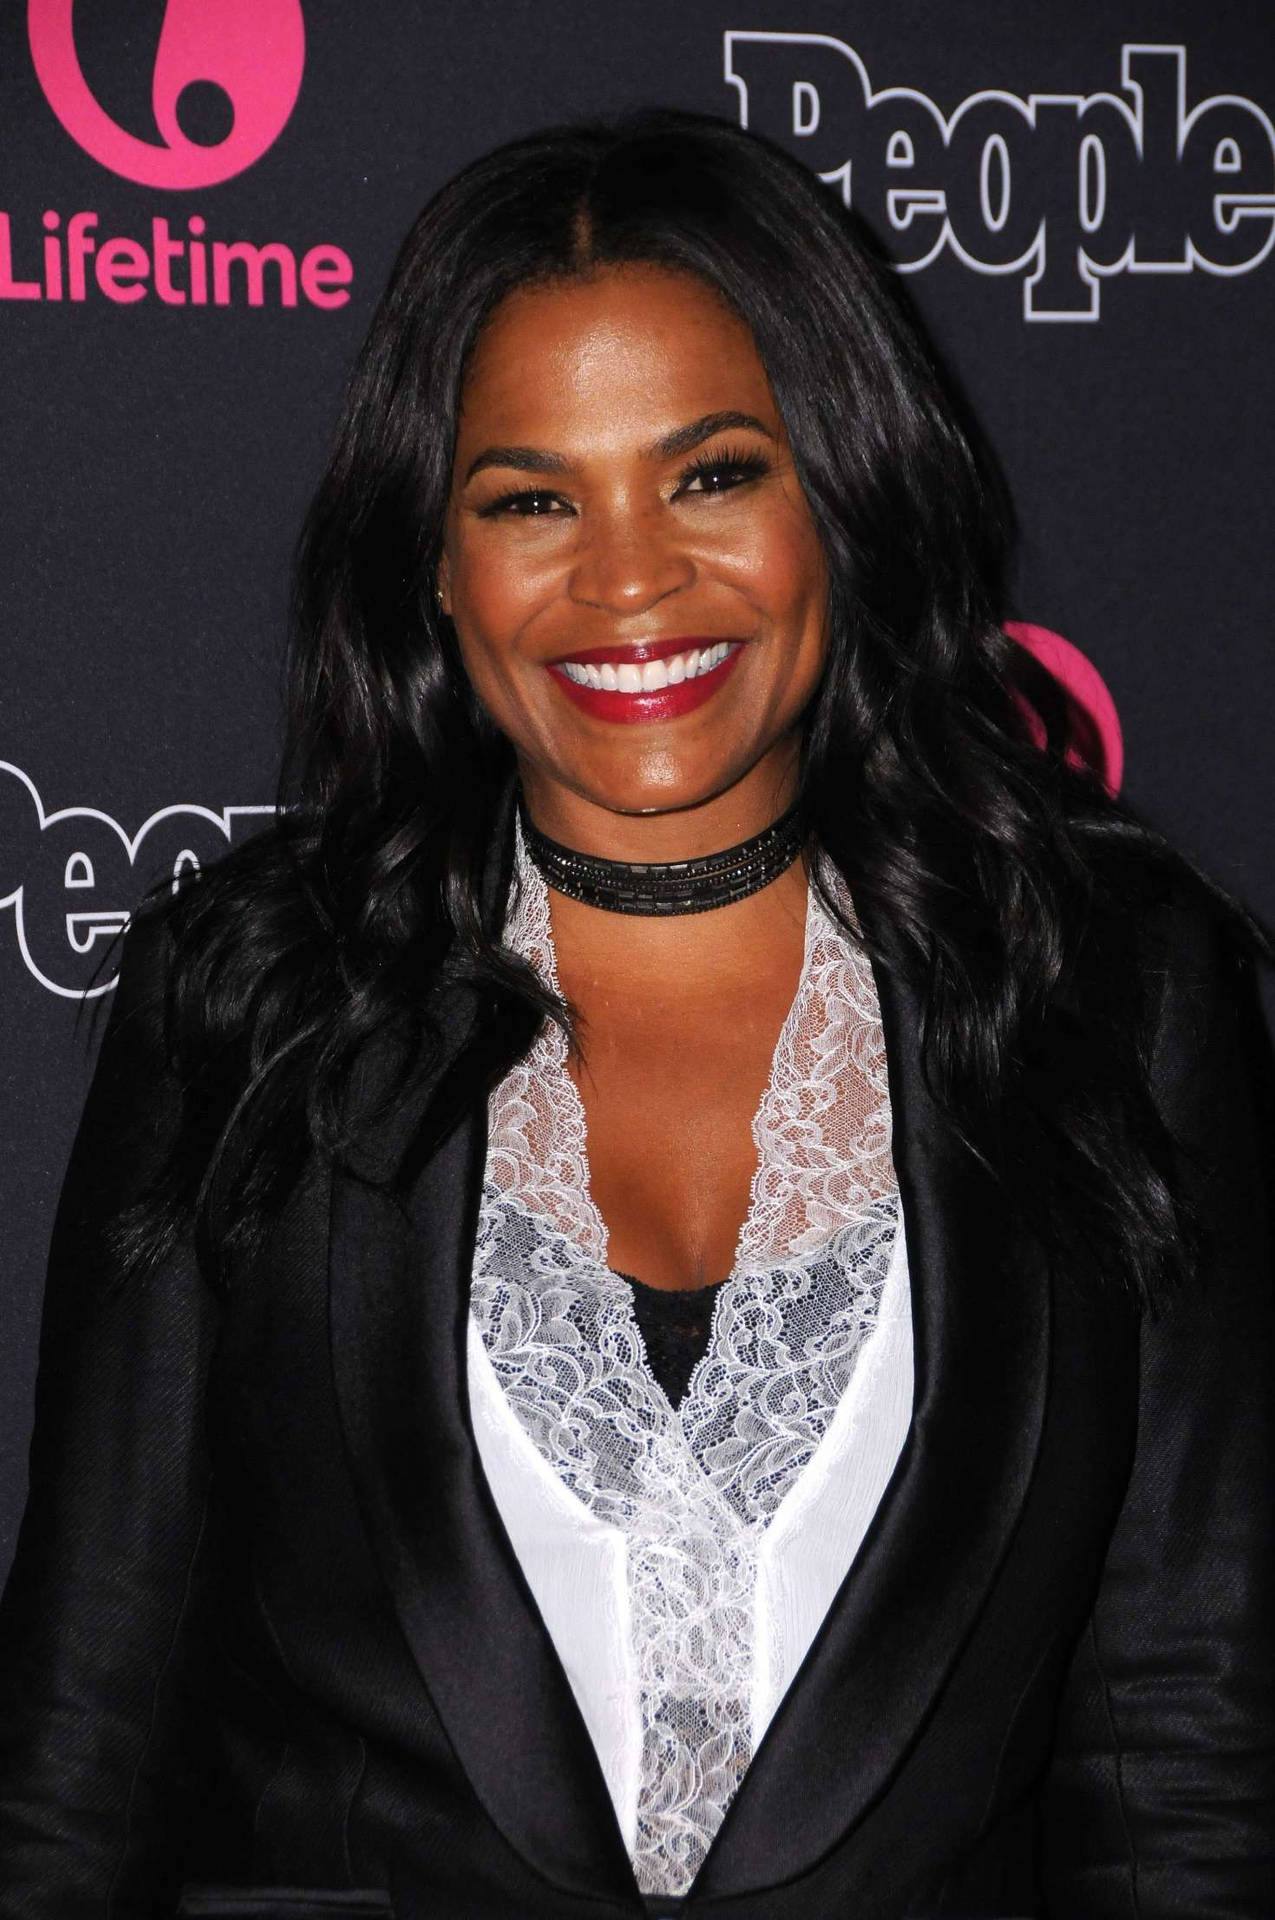 Accomplished Actress and Director Nia Long in Action Wallpaper